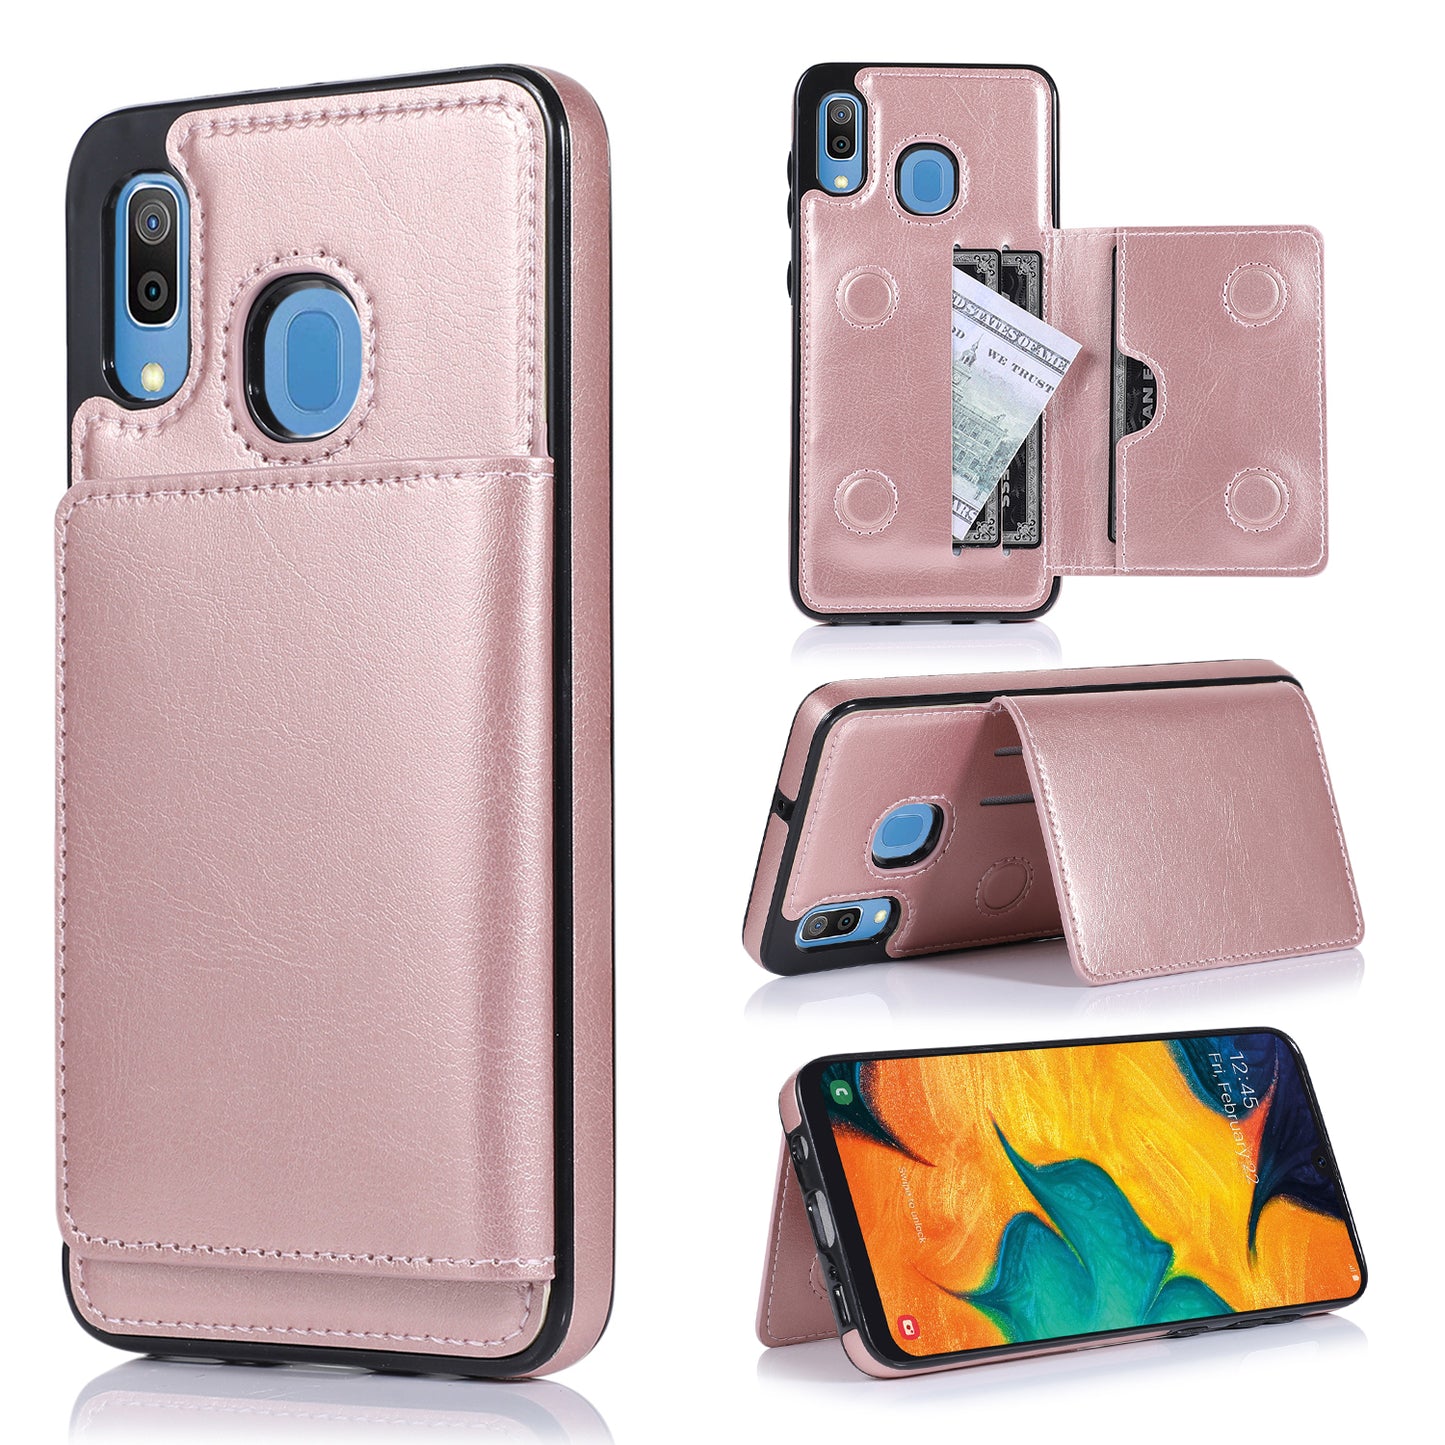 Samsung Galaxy A20 Leather Cover Multiple Card Slots Magnetic Storage Pouch Kickstand